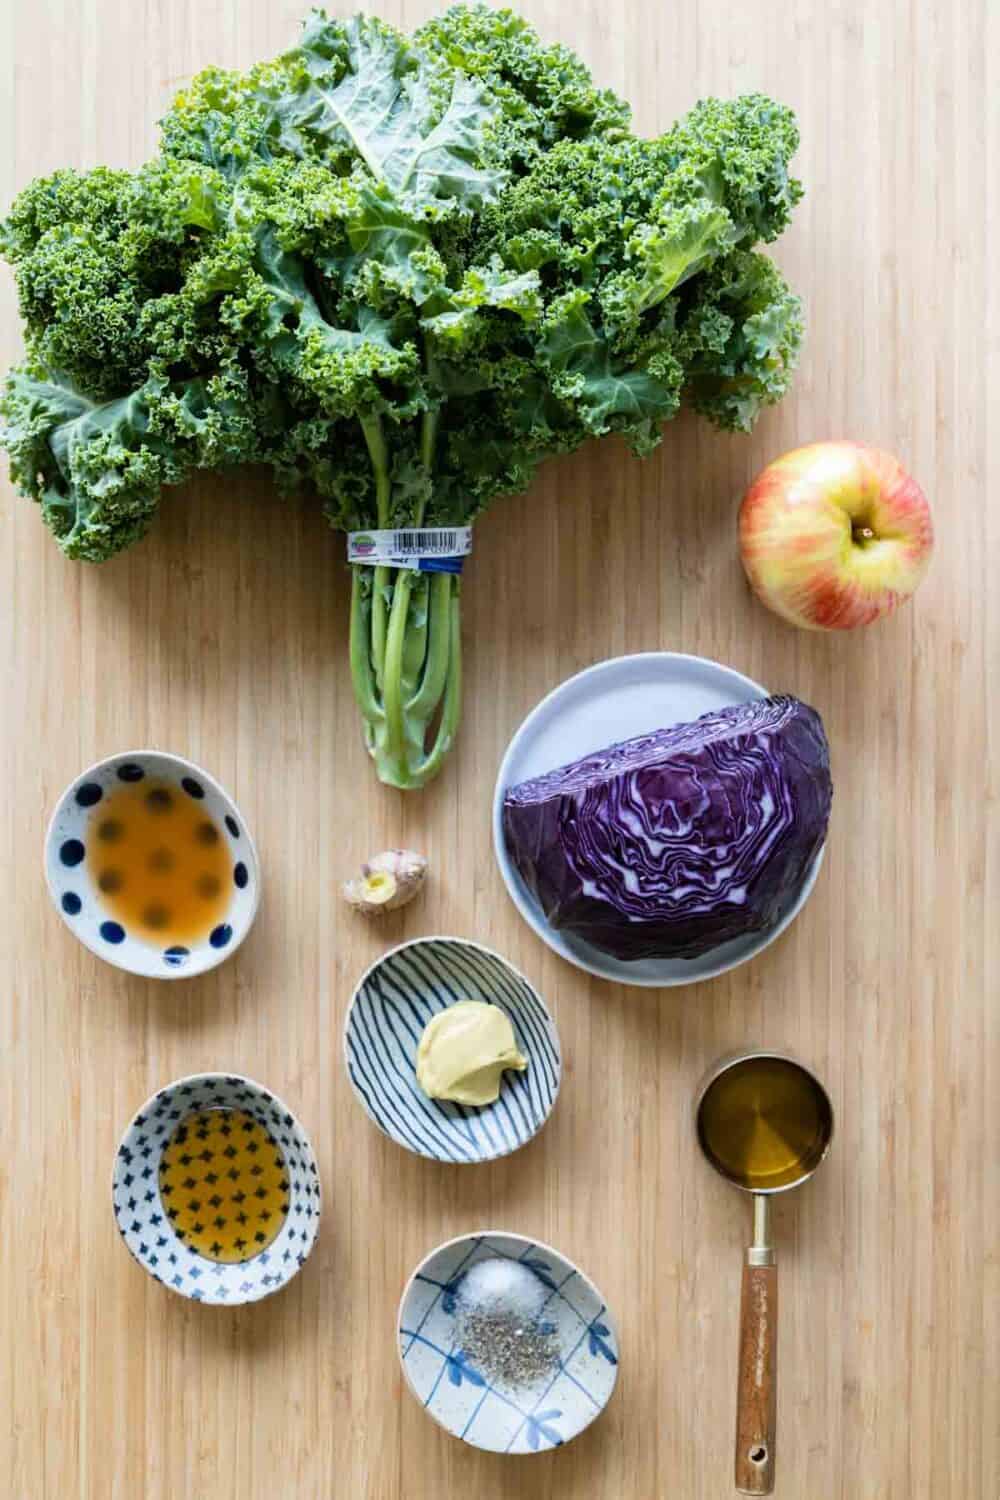 Ingredients for simple kale salad laid out on a kitchen counter.